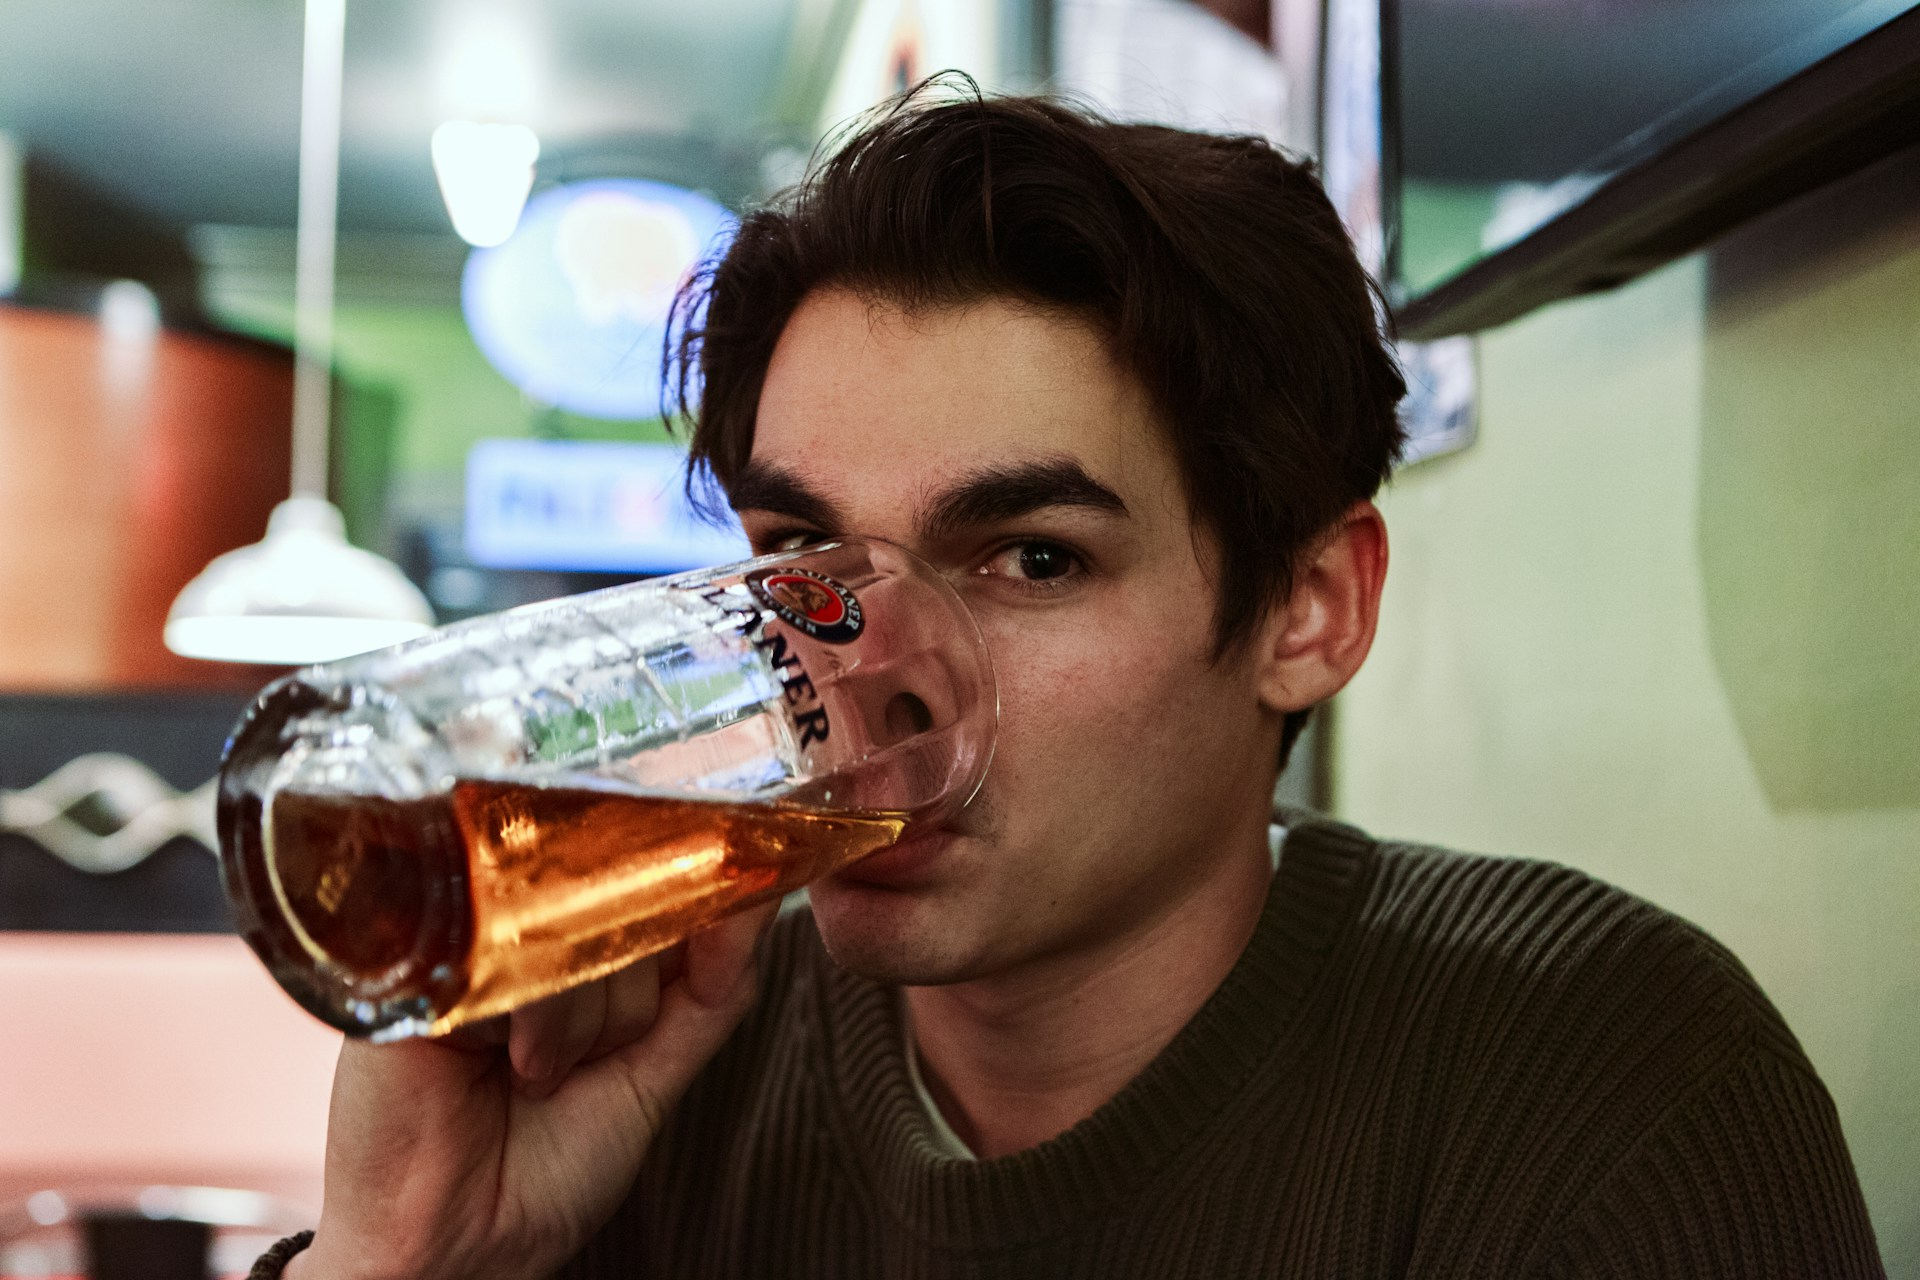 A man drinking a large beer in moderation since he knows heavy drinking can decrease his sperm count